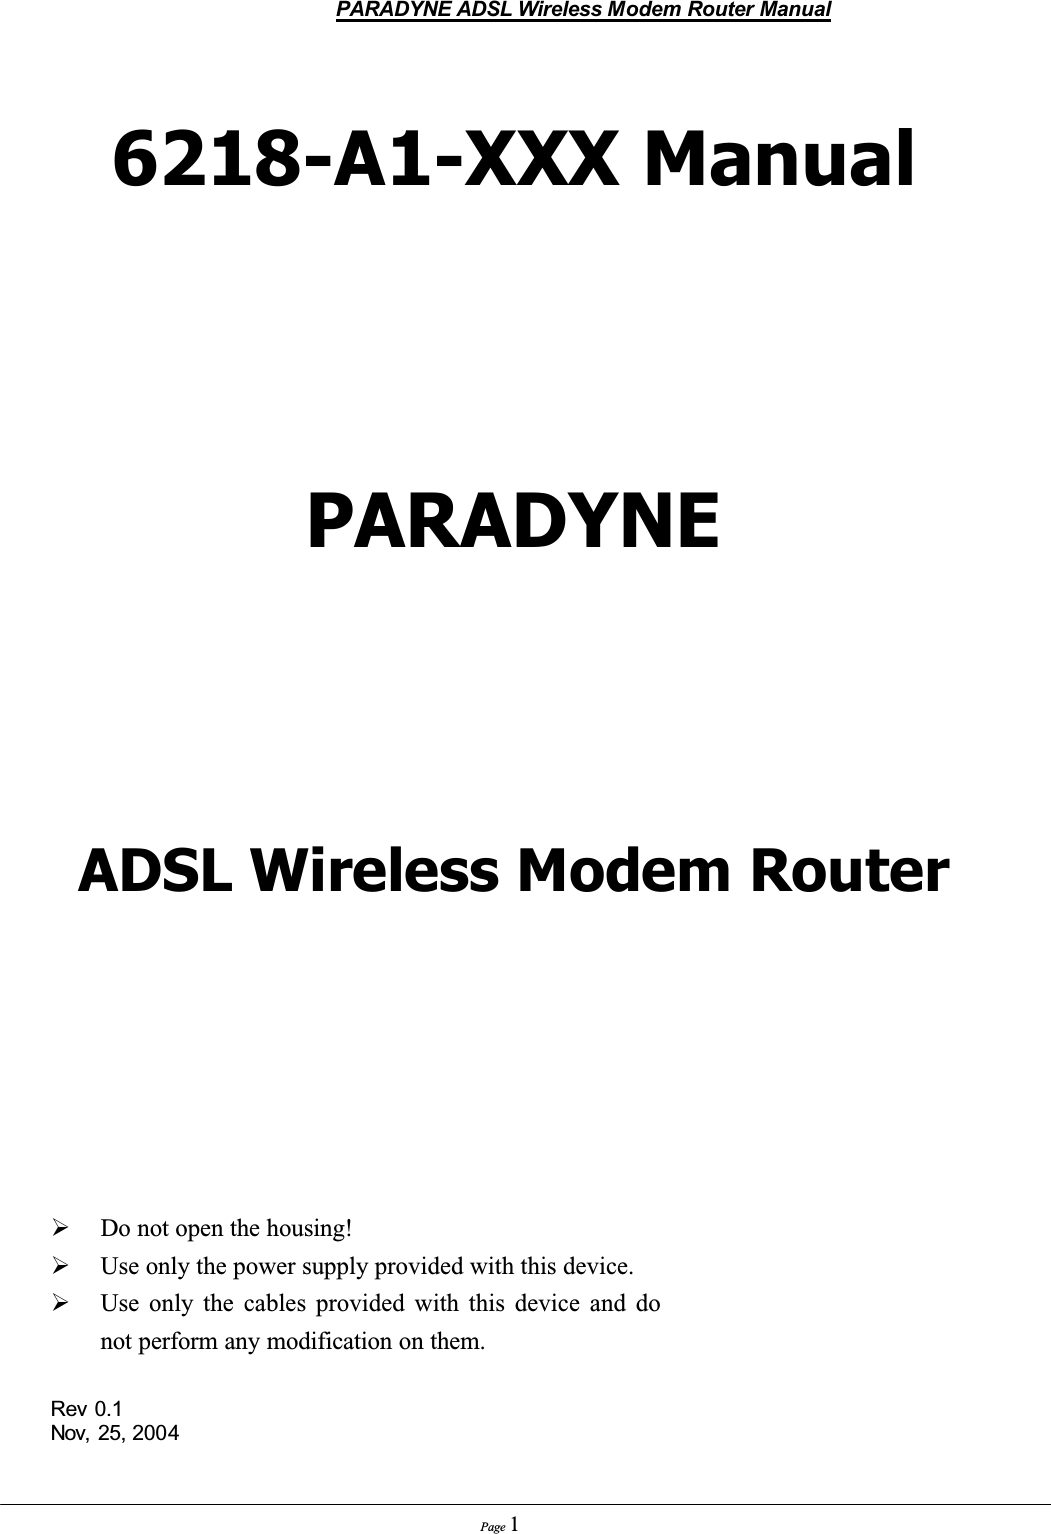 PARADYNE ADSL Wireless Modem Router ManualPage 16218-A1-XXX ManualPARADYNEADSL Wireless Modem Router¾Do not open the housing!¾Use only the power supply provided with this device.¾Use only the cables provided with this device and do not perform any modification on them.Rev 0.1Nov, 25, 2004